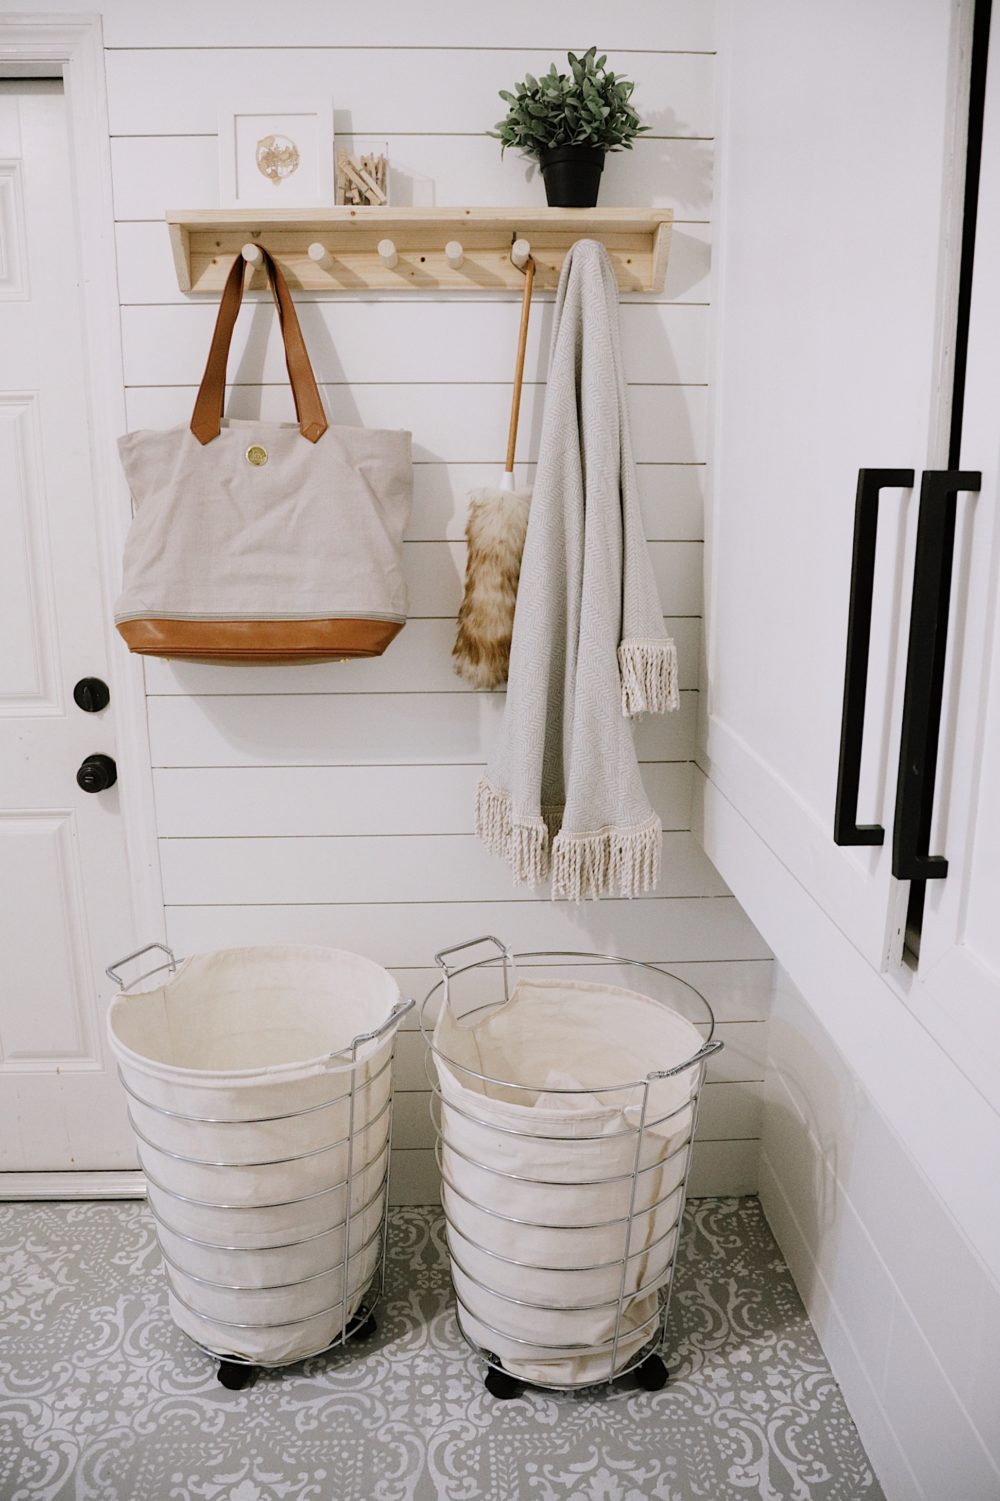 How We Designed a Family Friendly Laundry Room in our Garage - The Reveal! | How We Designed a Family Friendly Laundry Room in our Garage - The Reveal! by popular Florida DIY blog, Fresh Mommy: image of a family friendly laundry room.